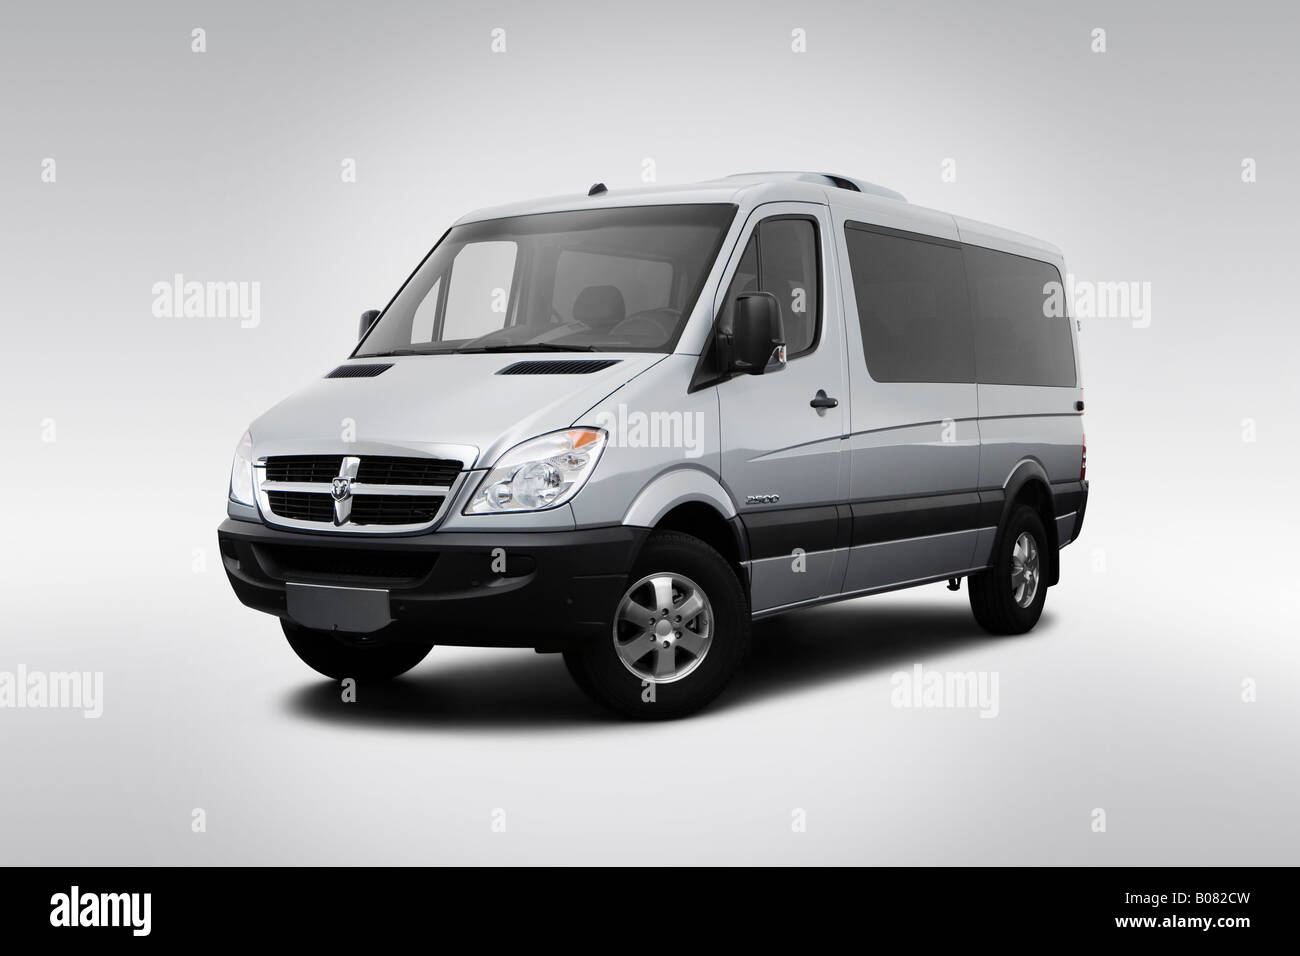 2008 Dodge Sprinter 2500 in Silver - Front angle view Stock Photo